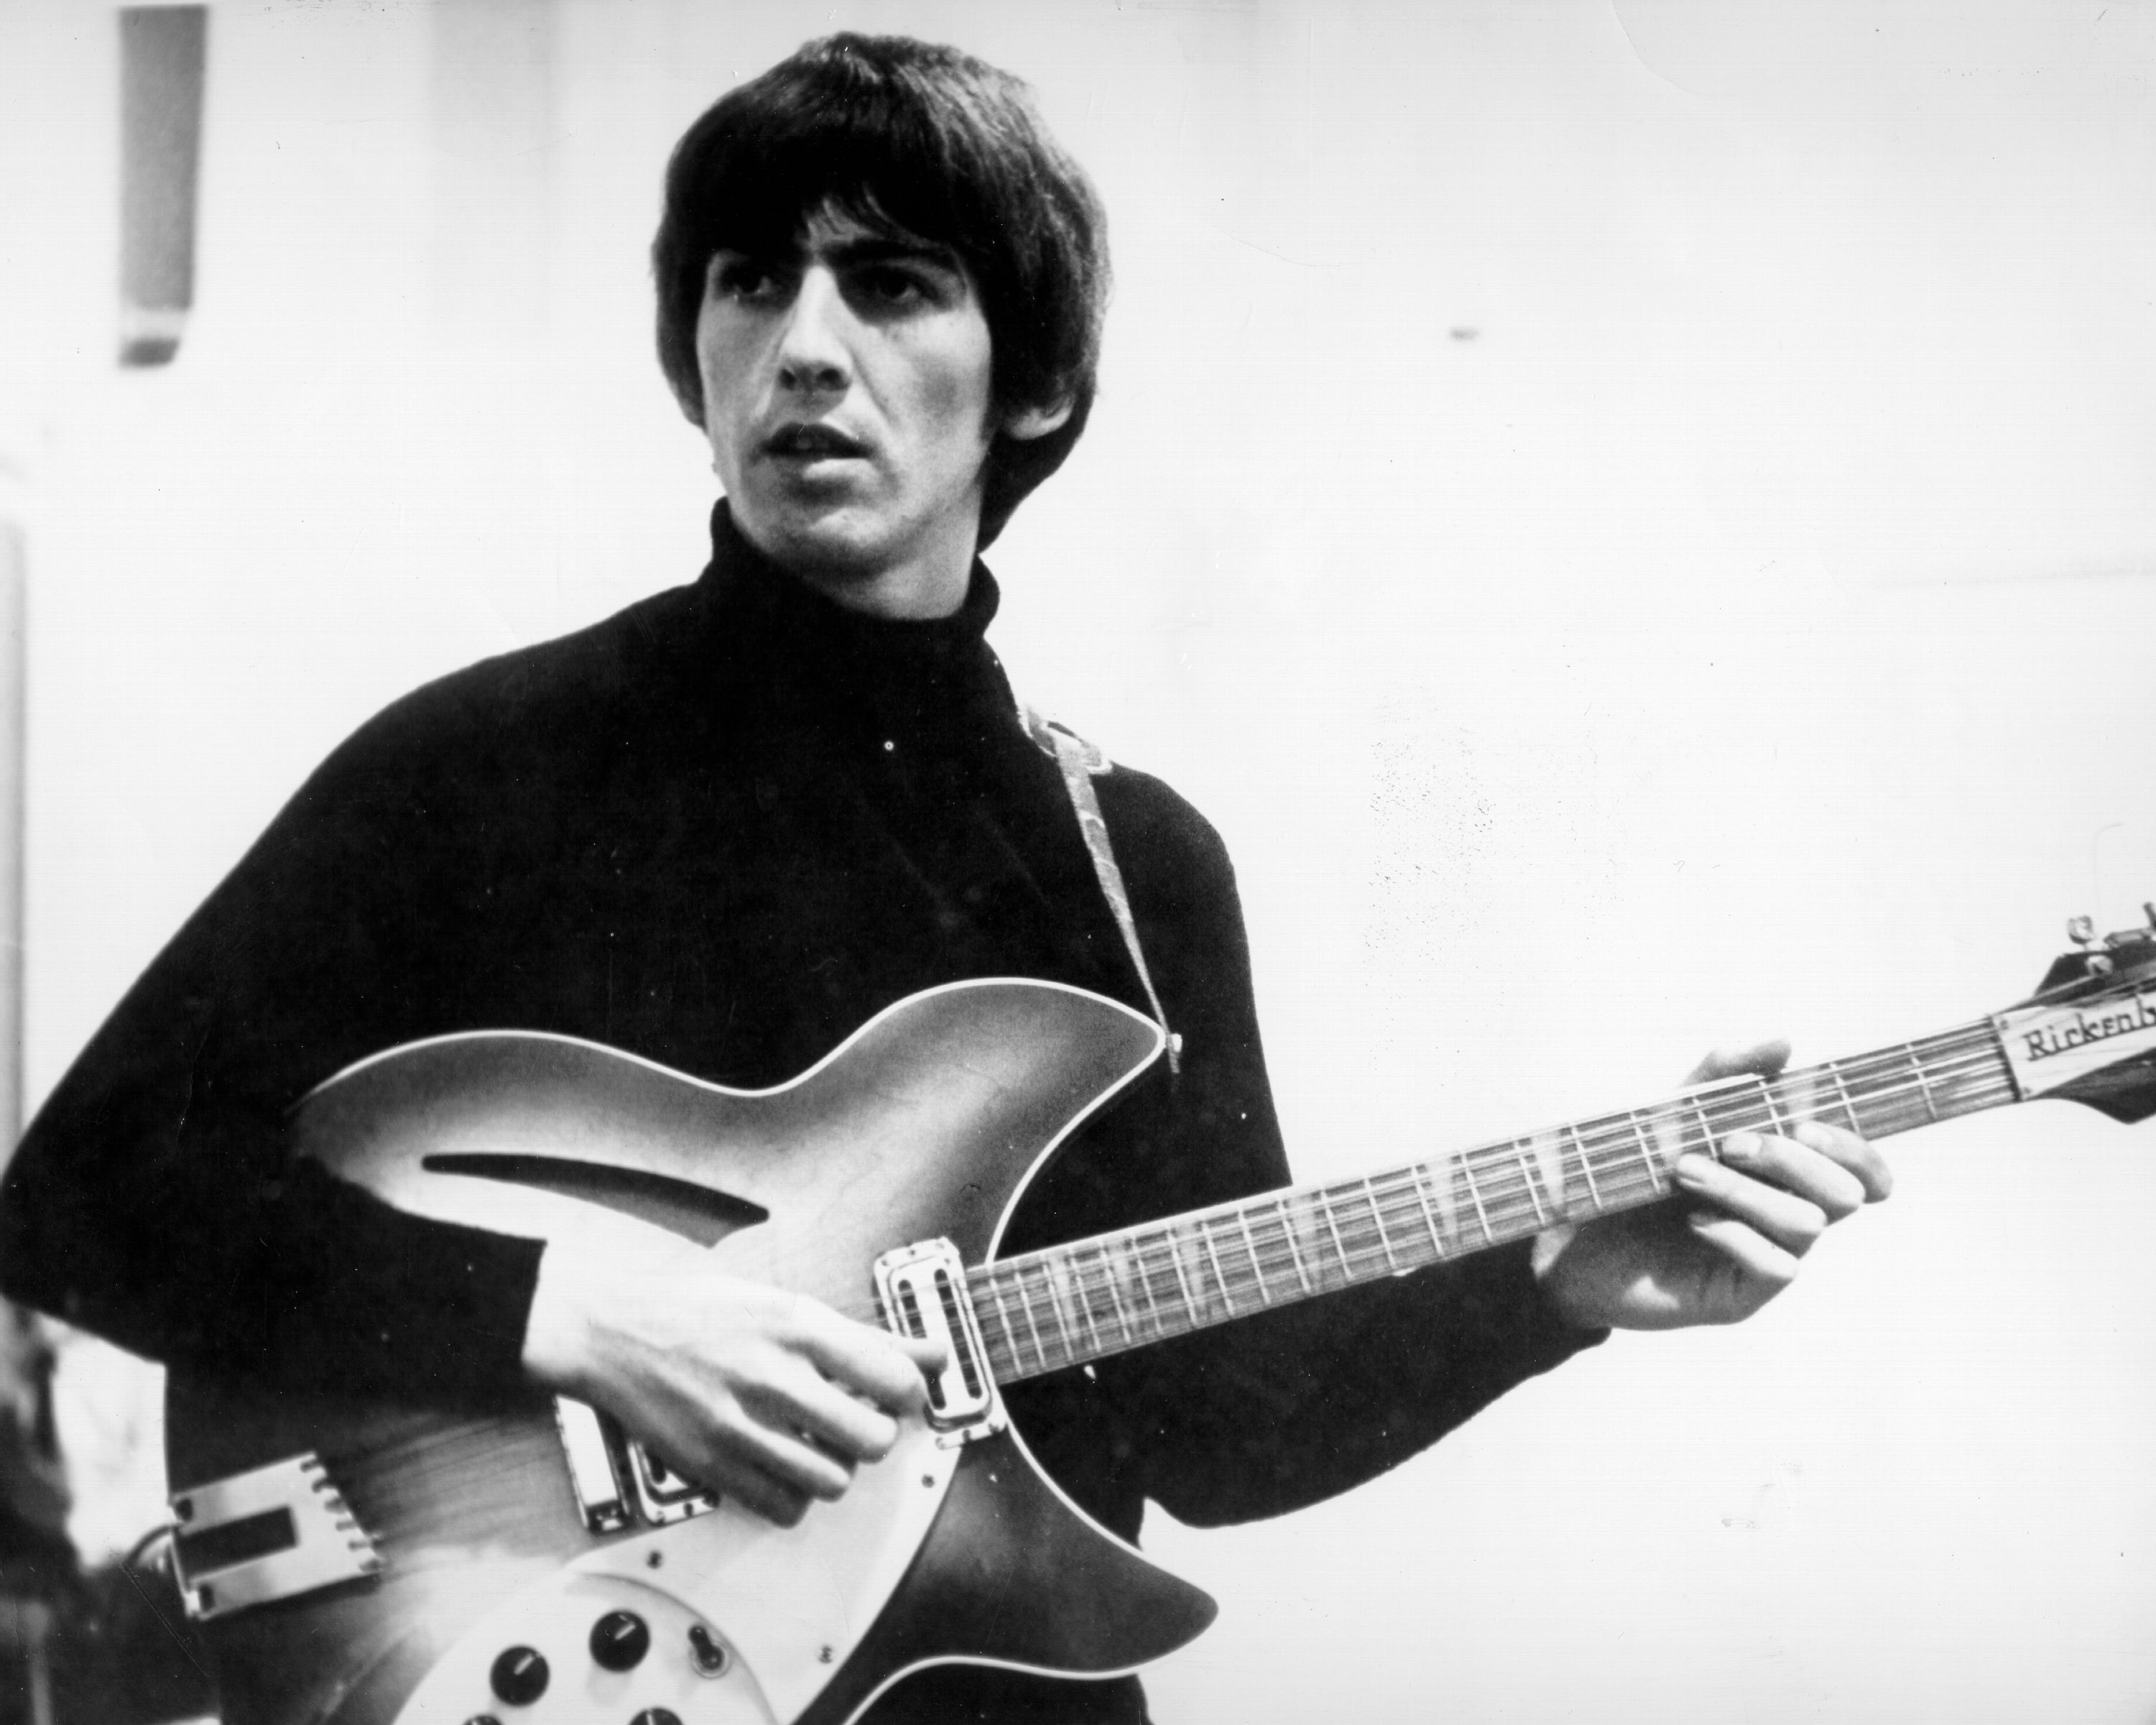 George Harrison's childhood home, where the Beatles rehearsed, is